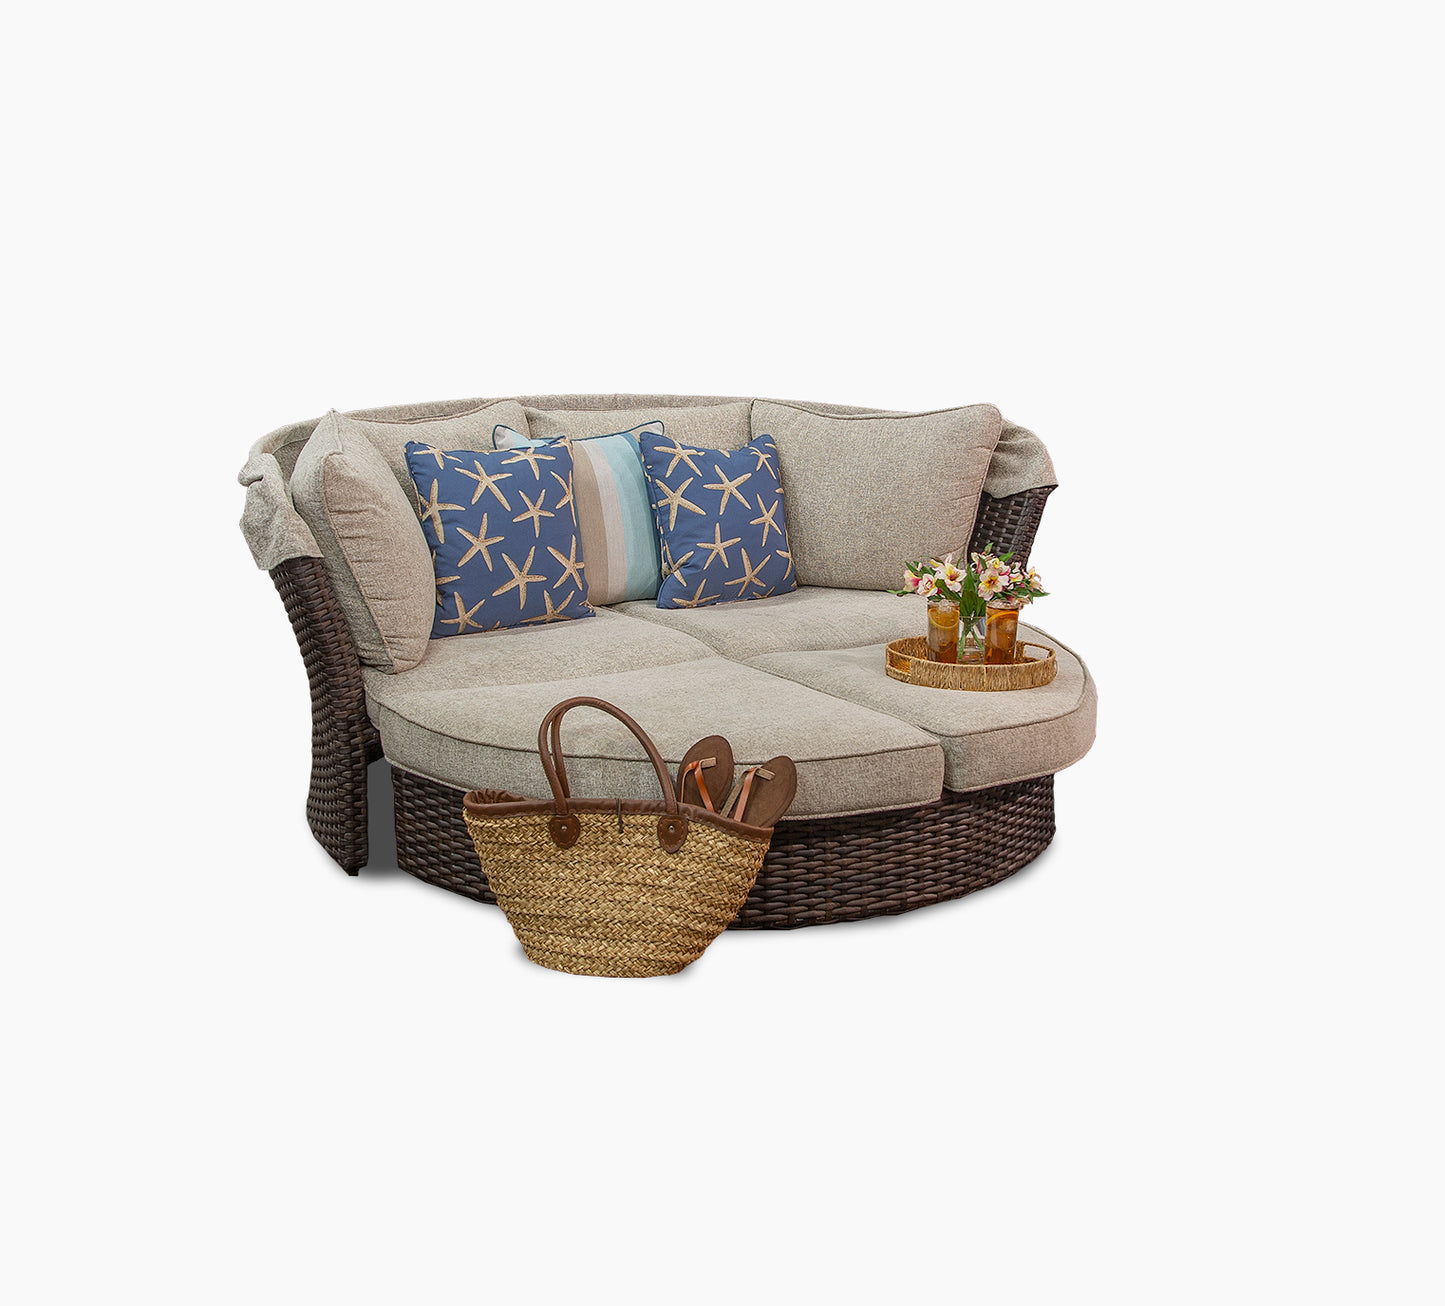 Coastline Outdoor Daybed with Canopy